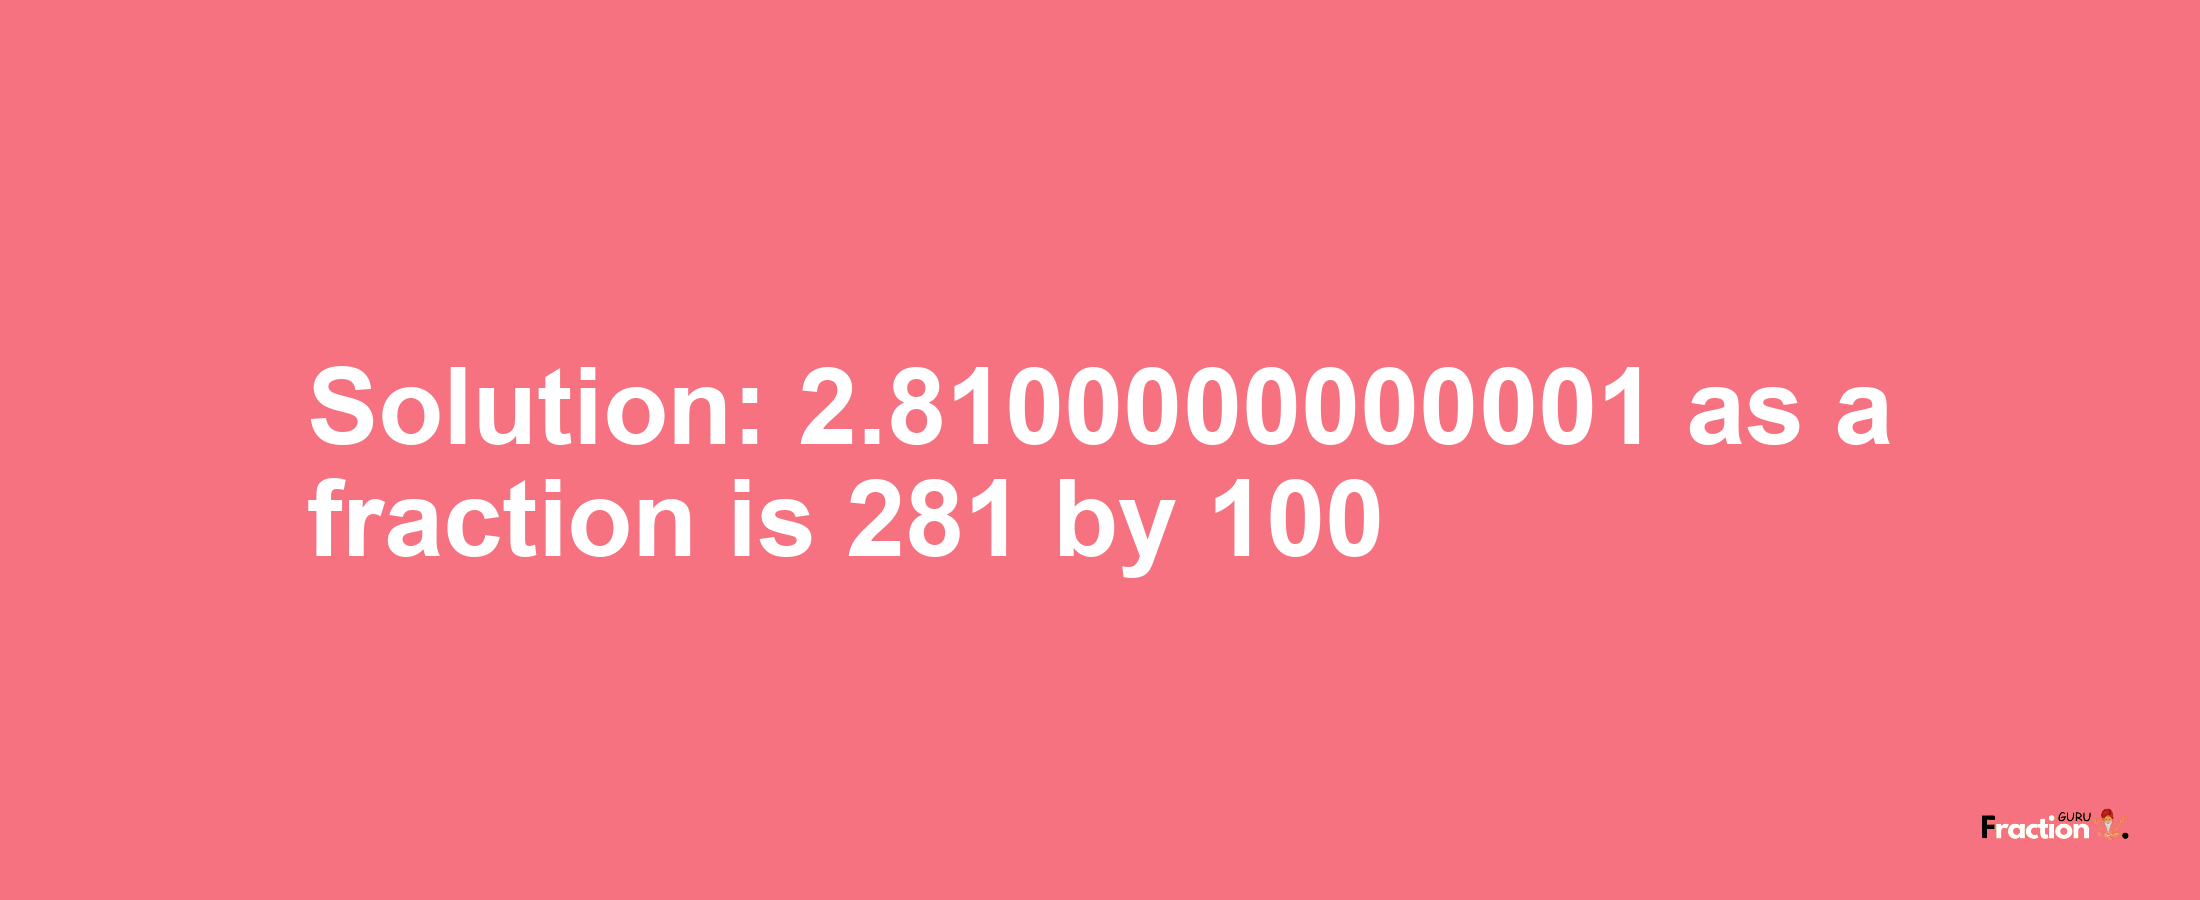 Solution:2.8100000000001 as a fraction is 281/100